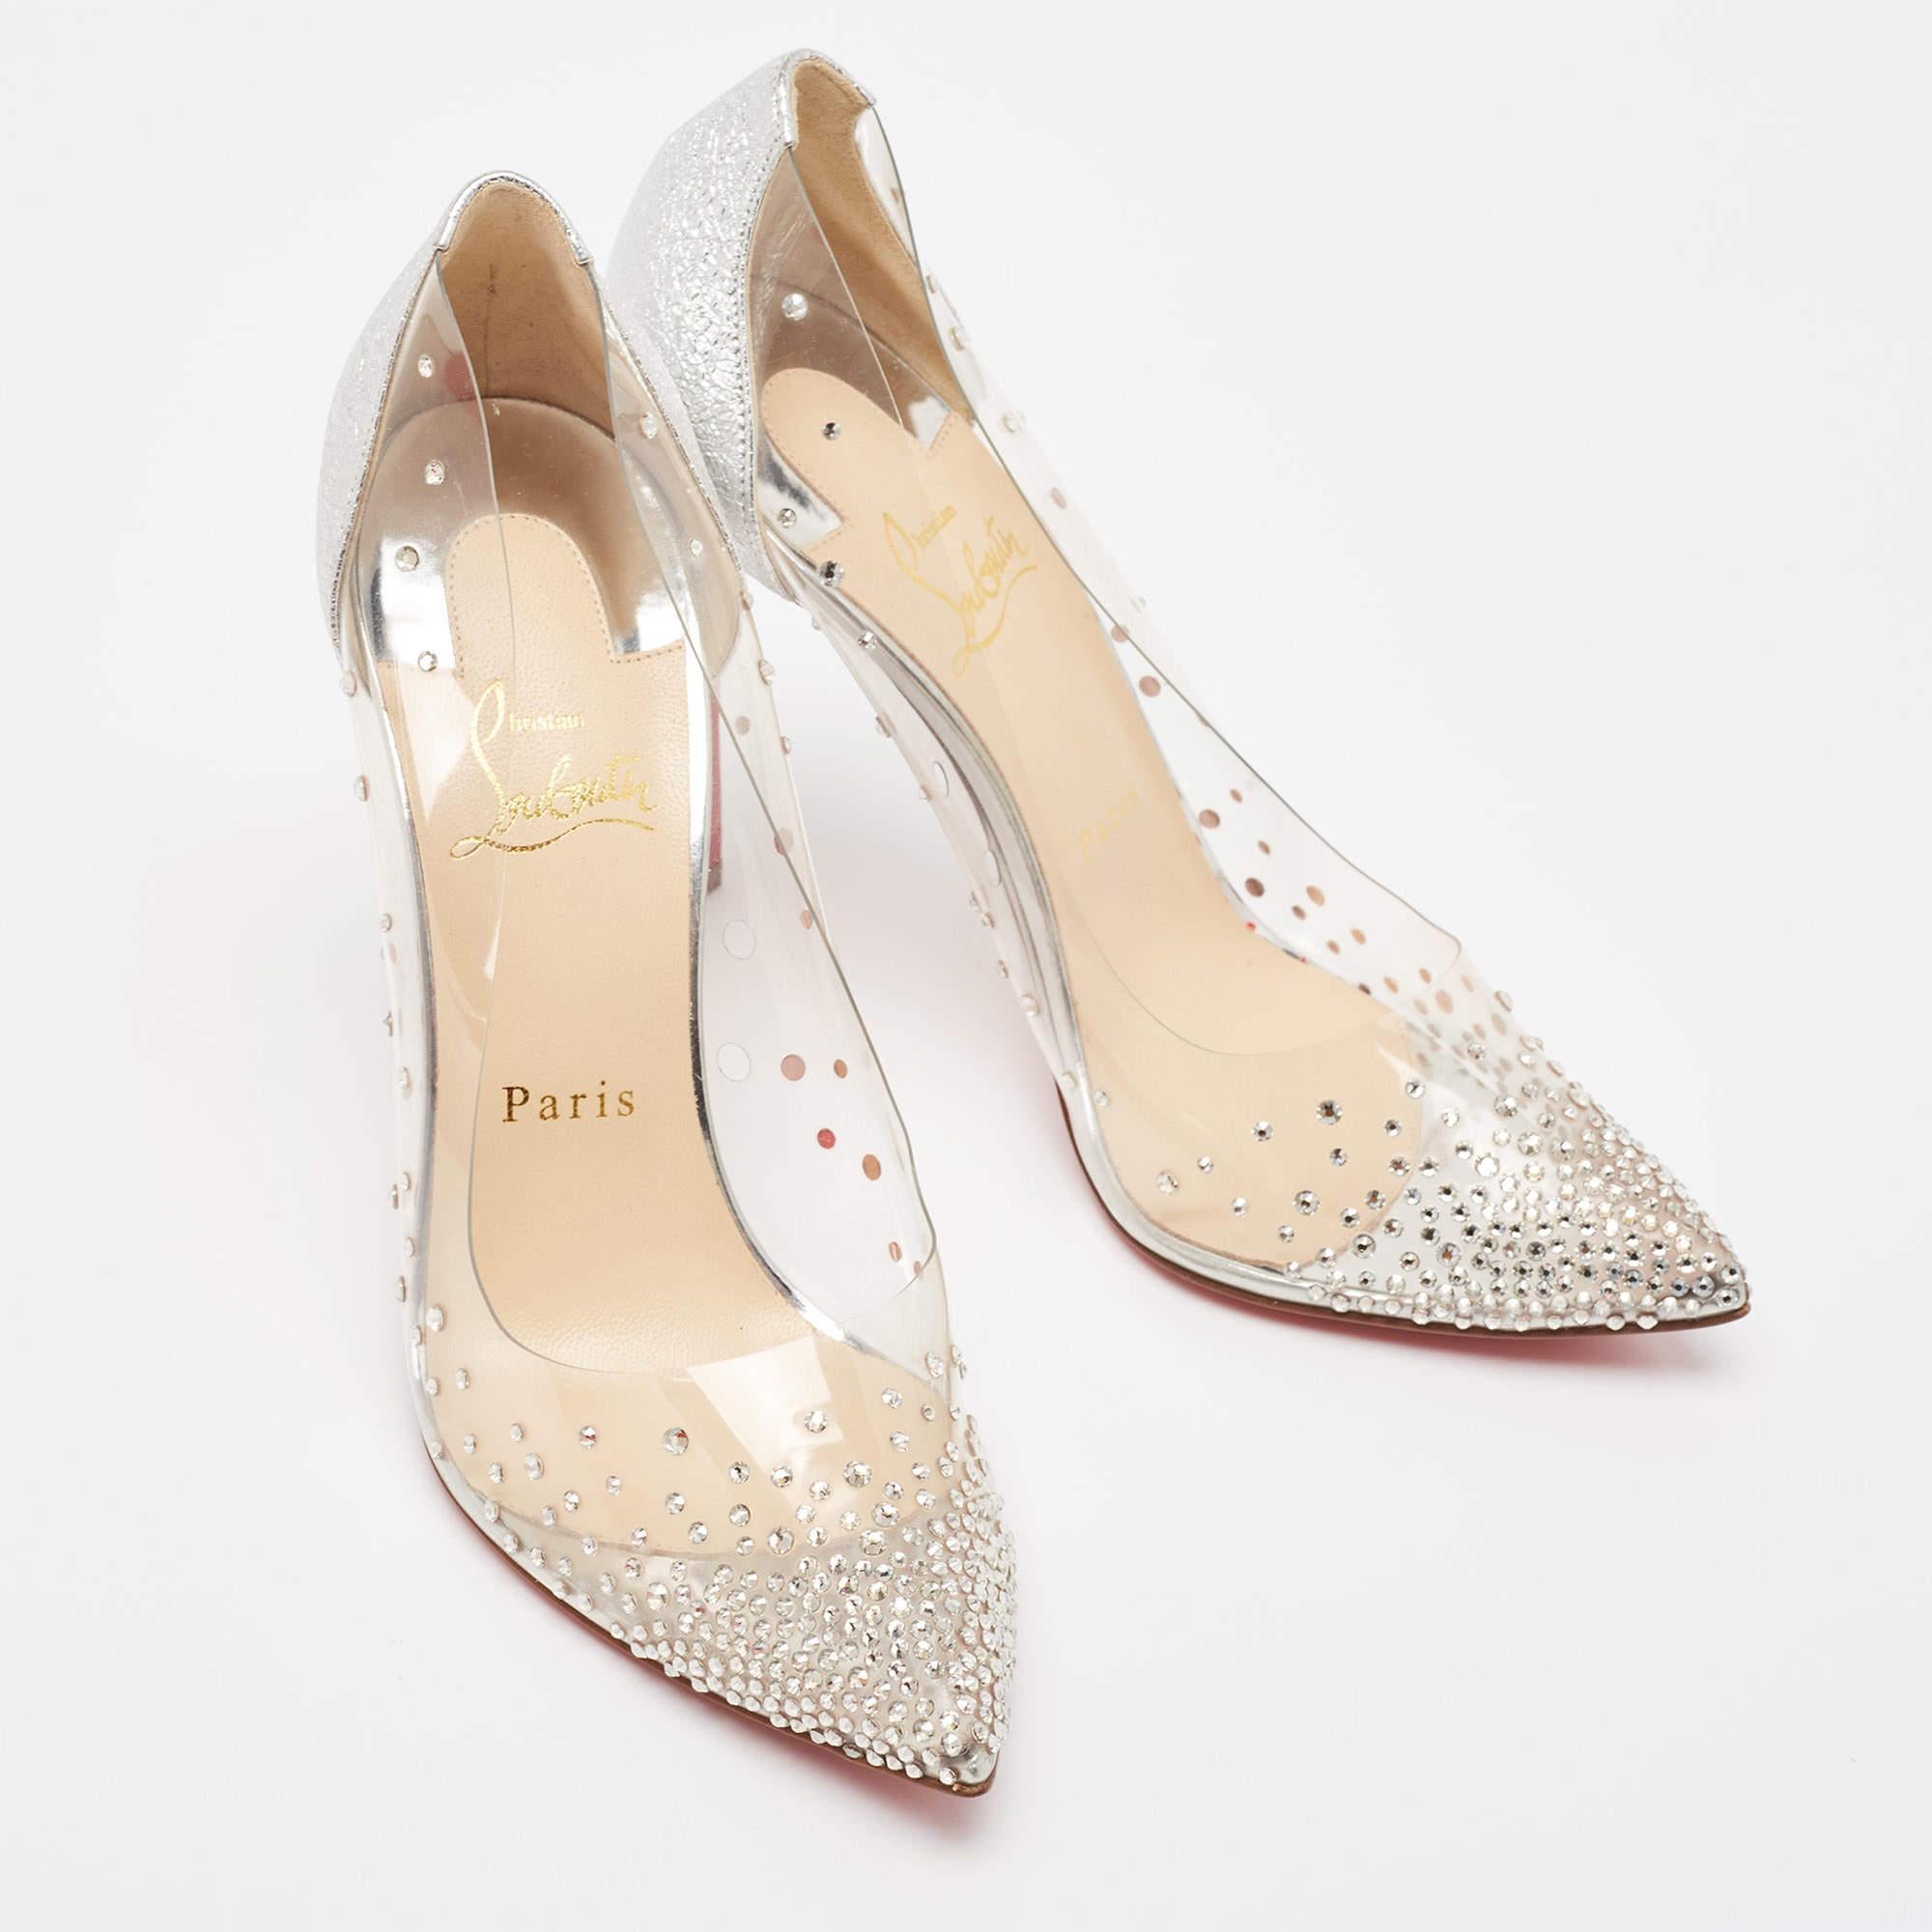 Women's Christian Louboutin Silver Textured Leather and PVC Degrastrass Pumps Size 38.5